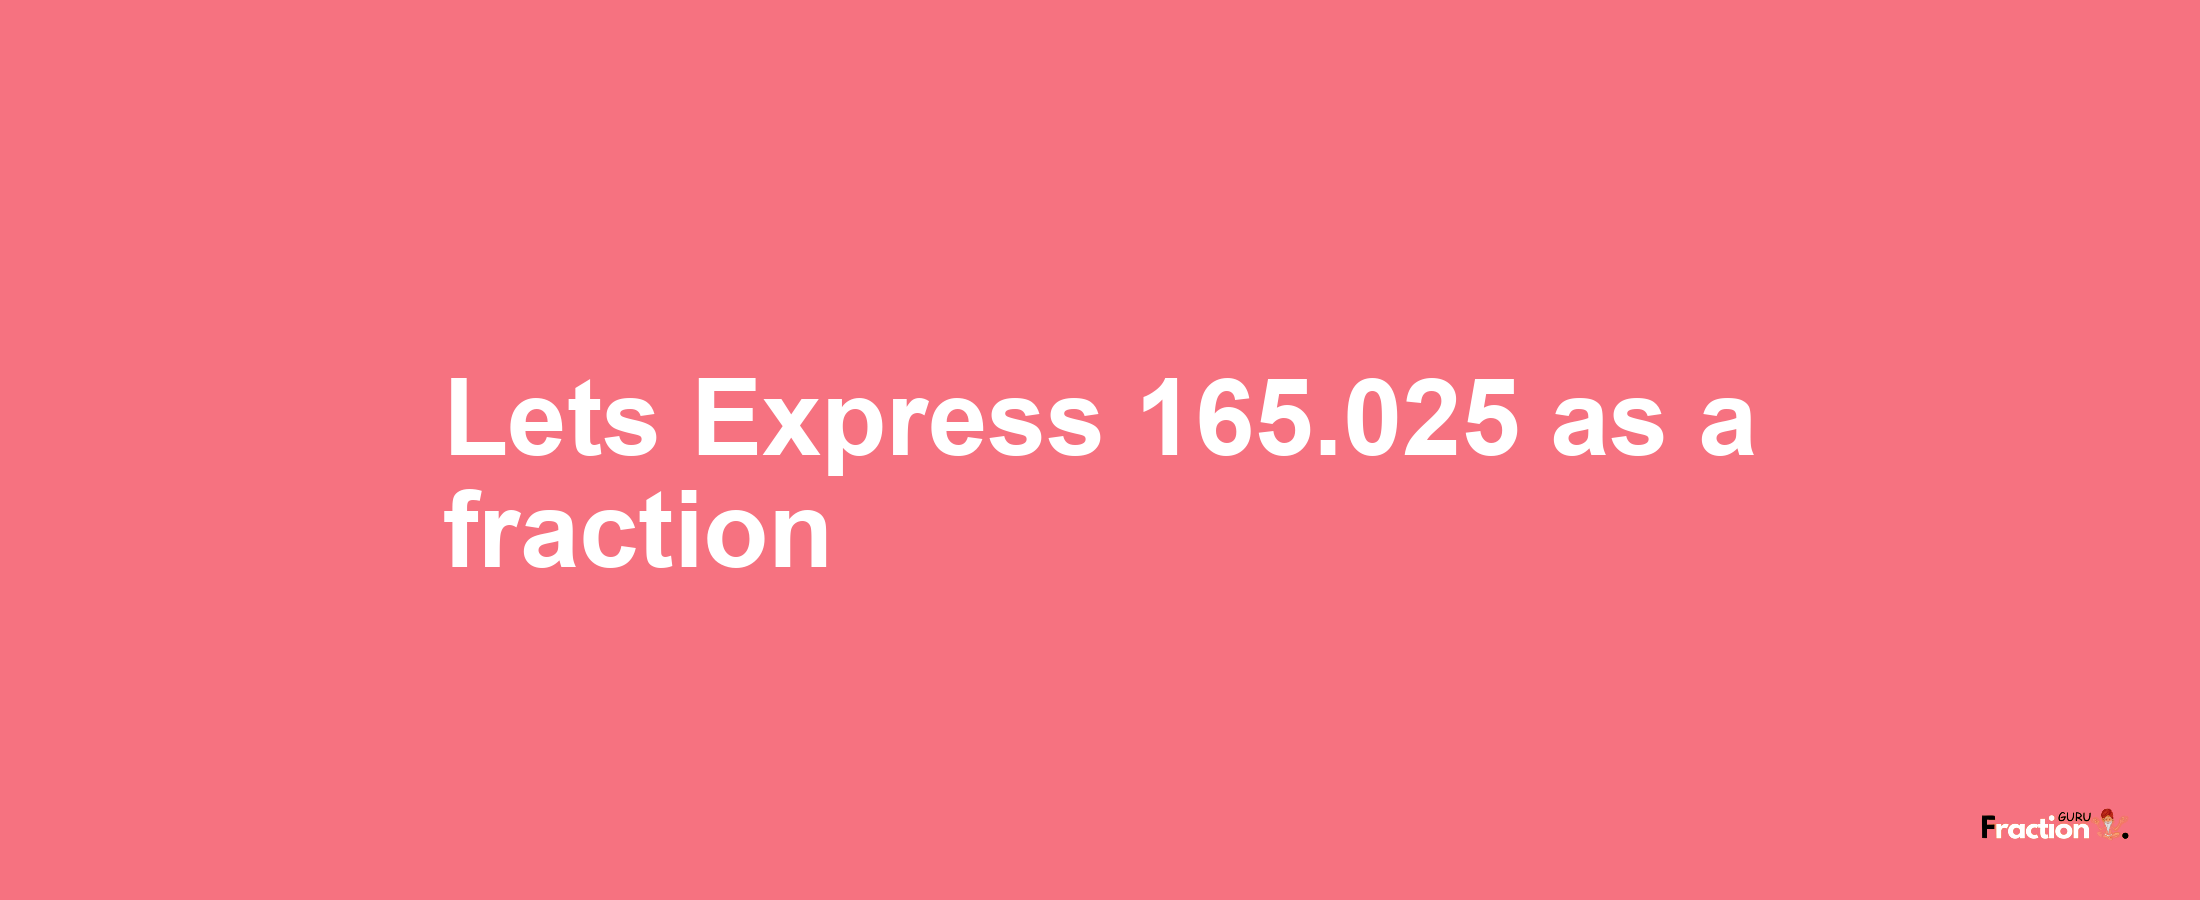 Lets Express 165.025 as afraction